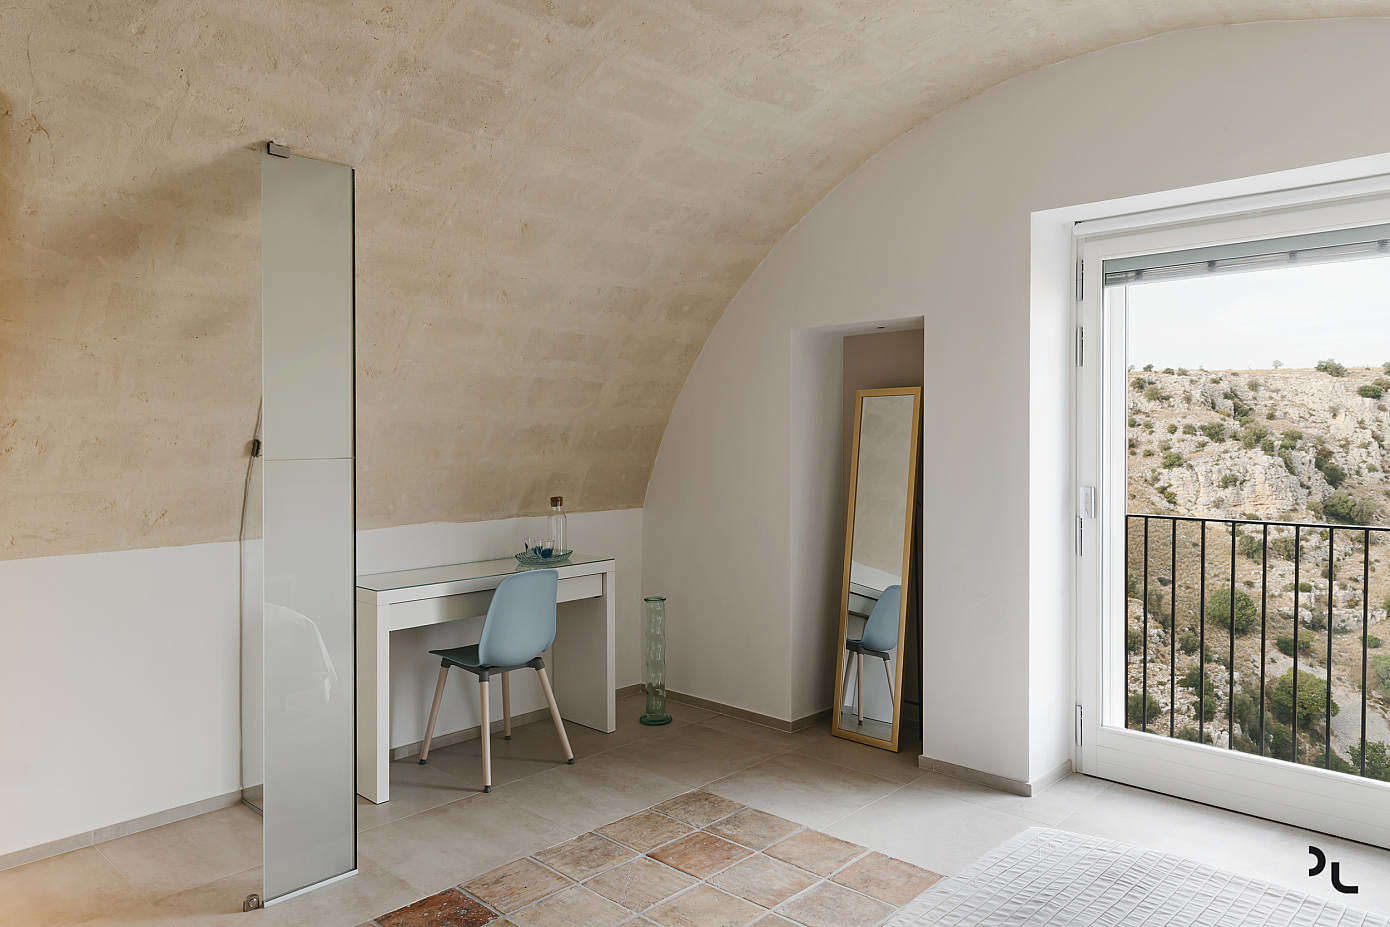 Apartment in Matera by Lomo Architecture